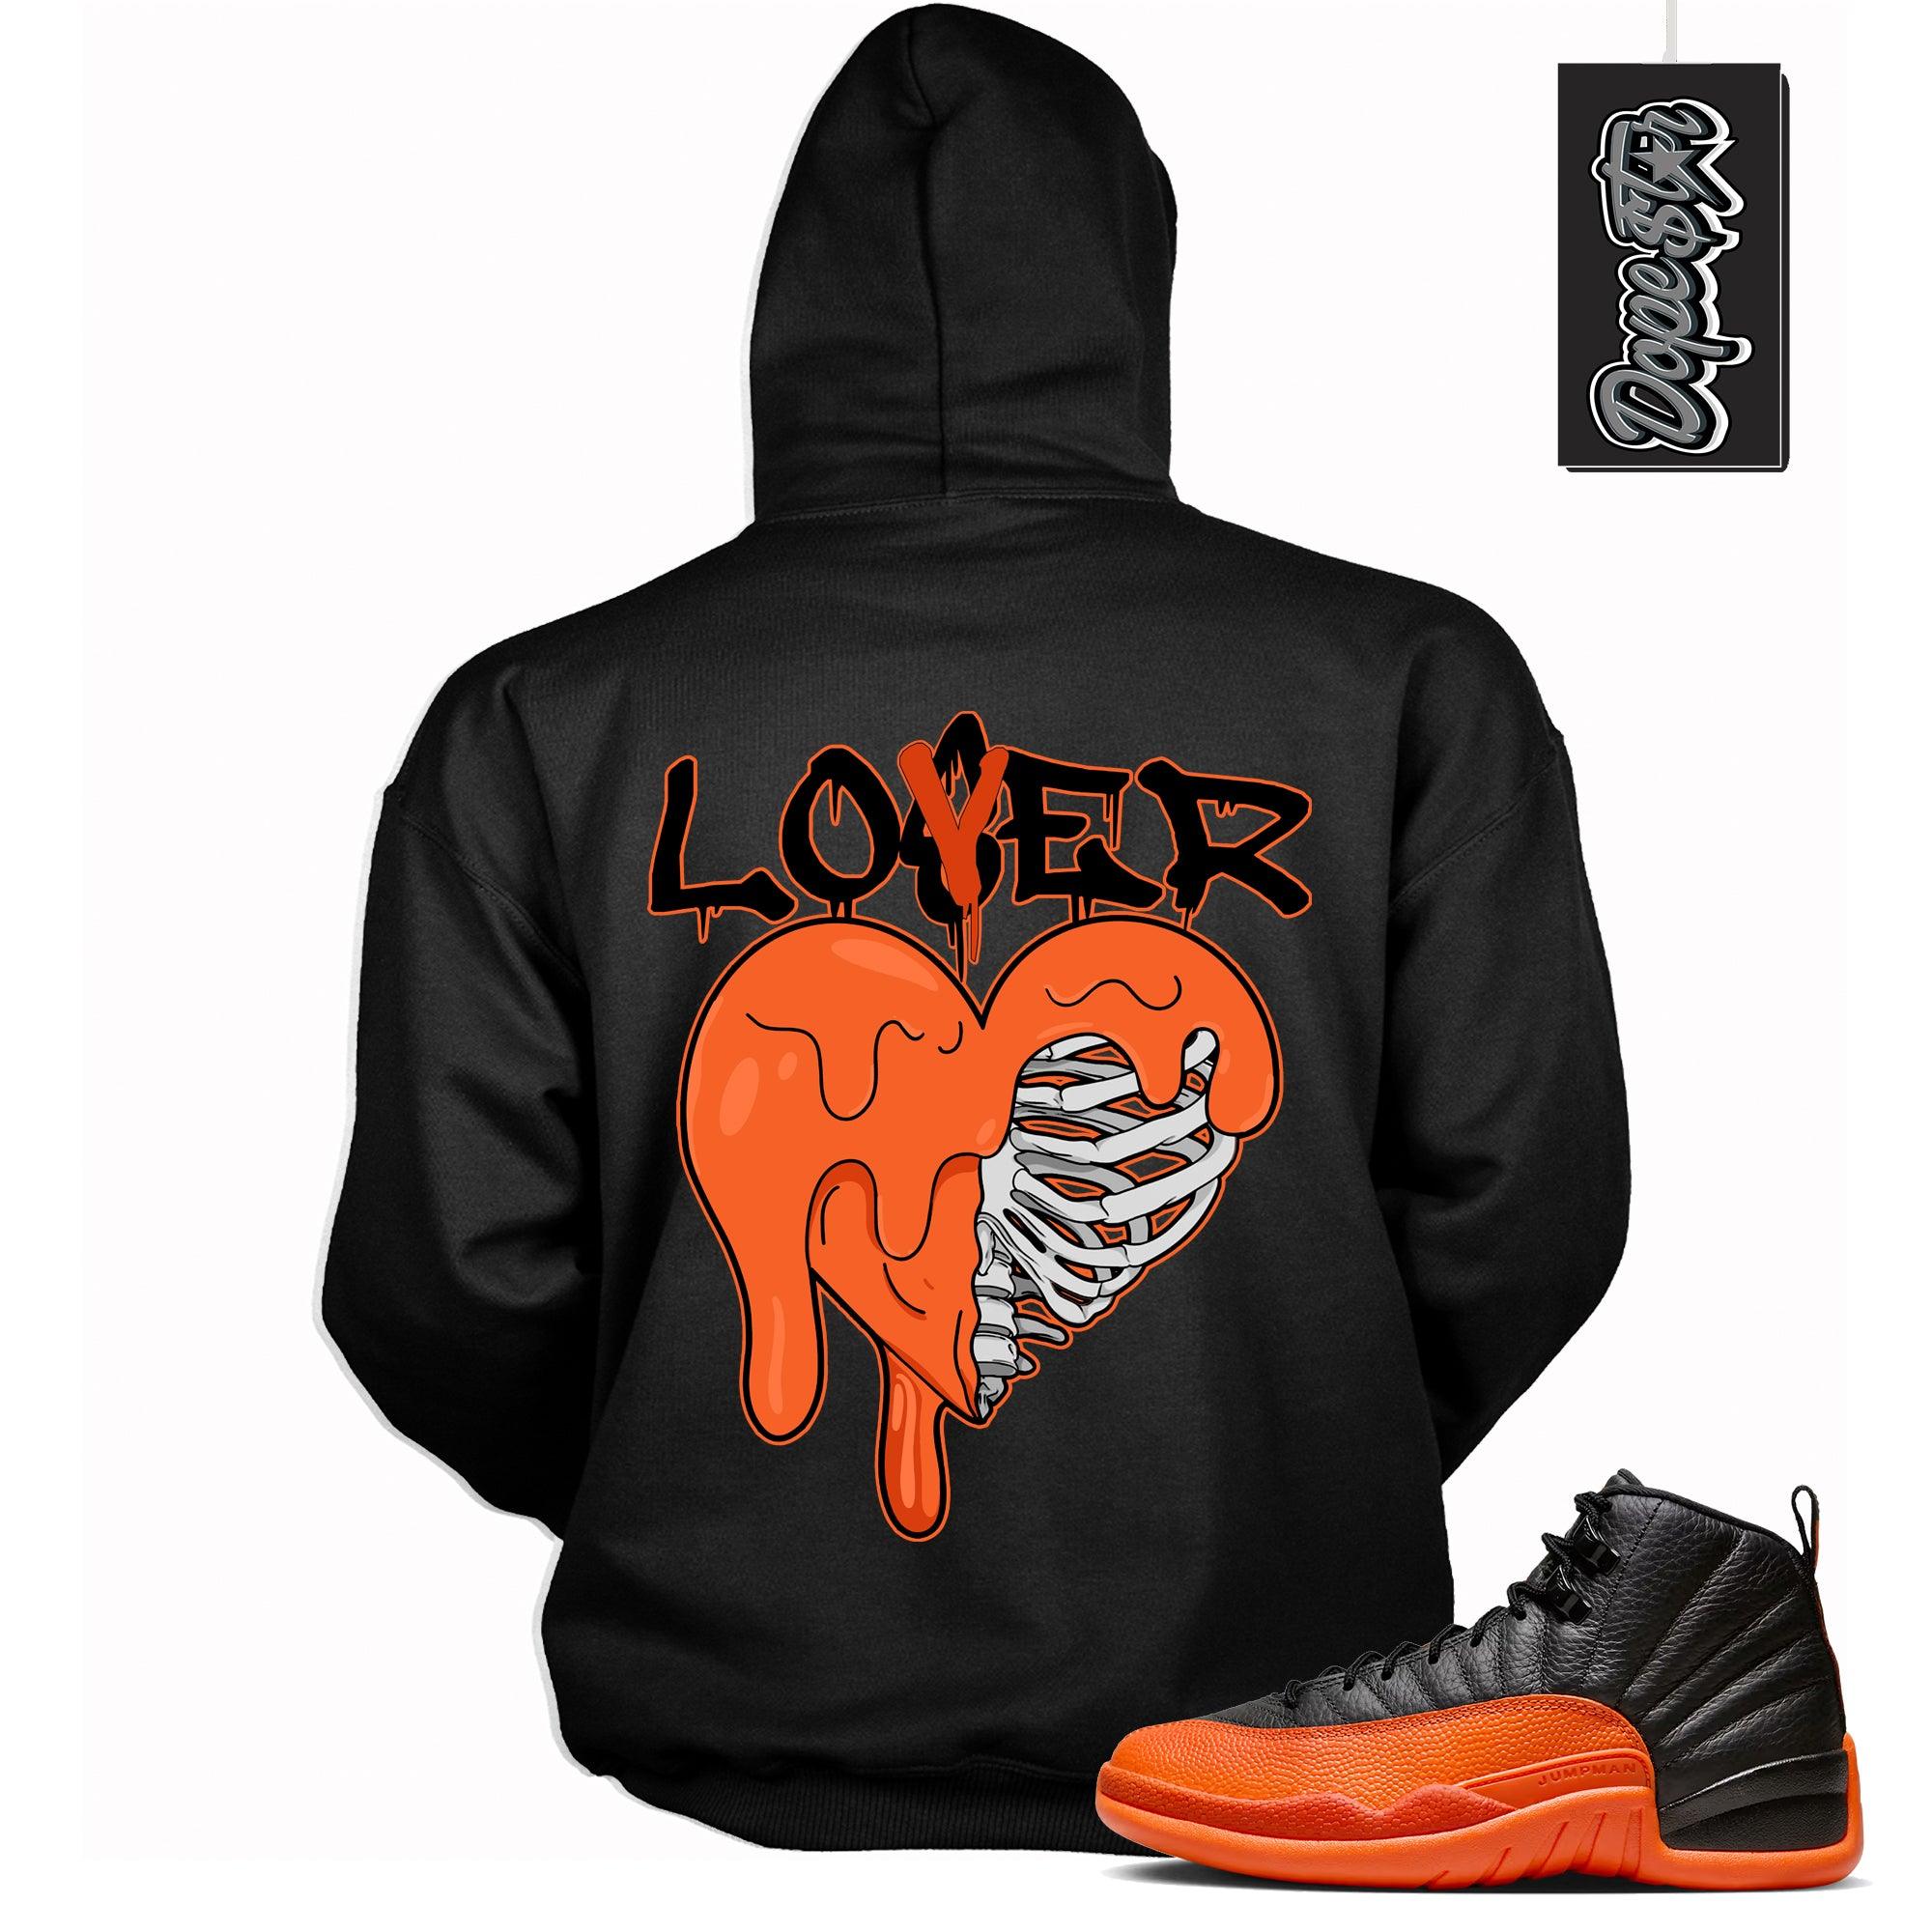 Cool Black Graphic Hoodie with “ Lover Loser “ print, that perfectly matches Air Jordan 12 Retro WNBA All-Star Brilliant Orange  sneakers